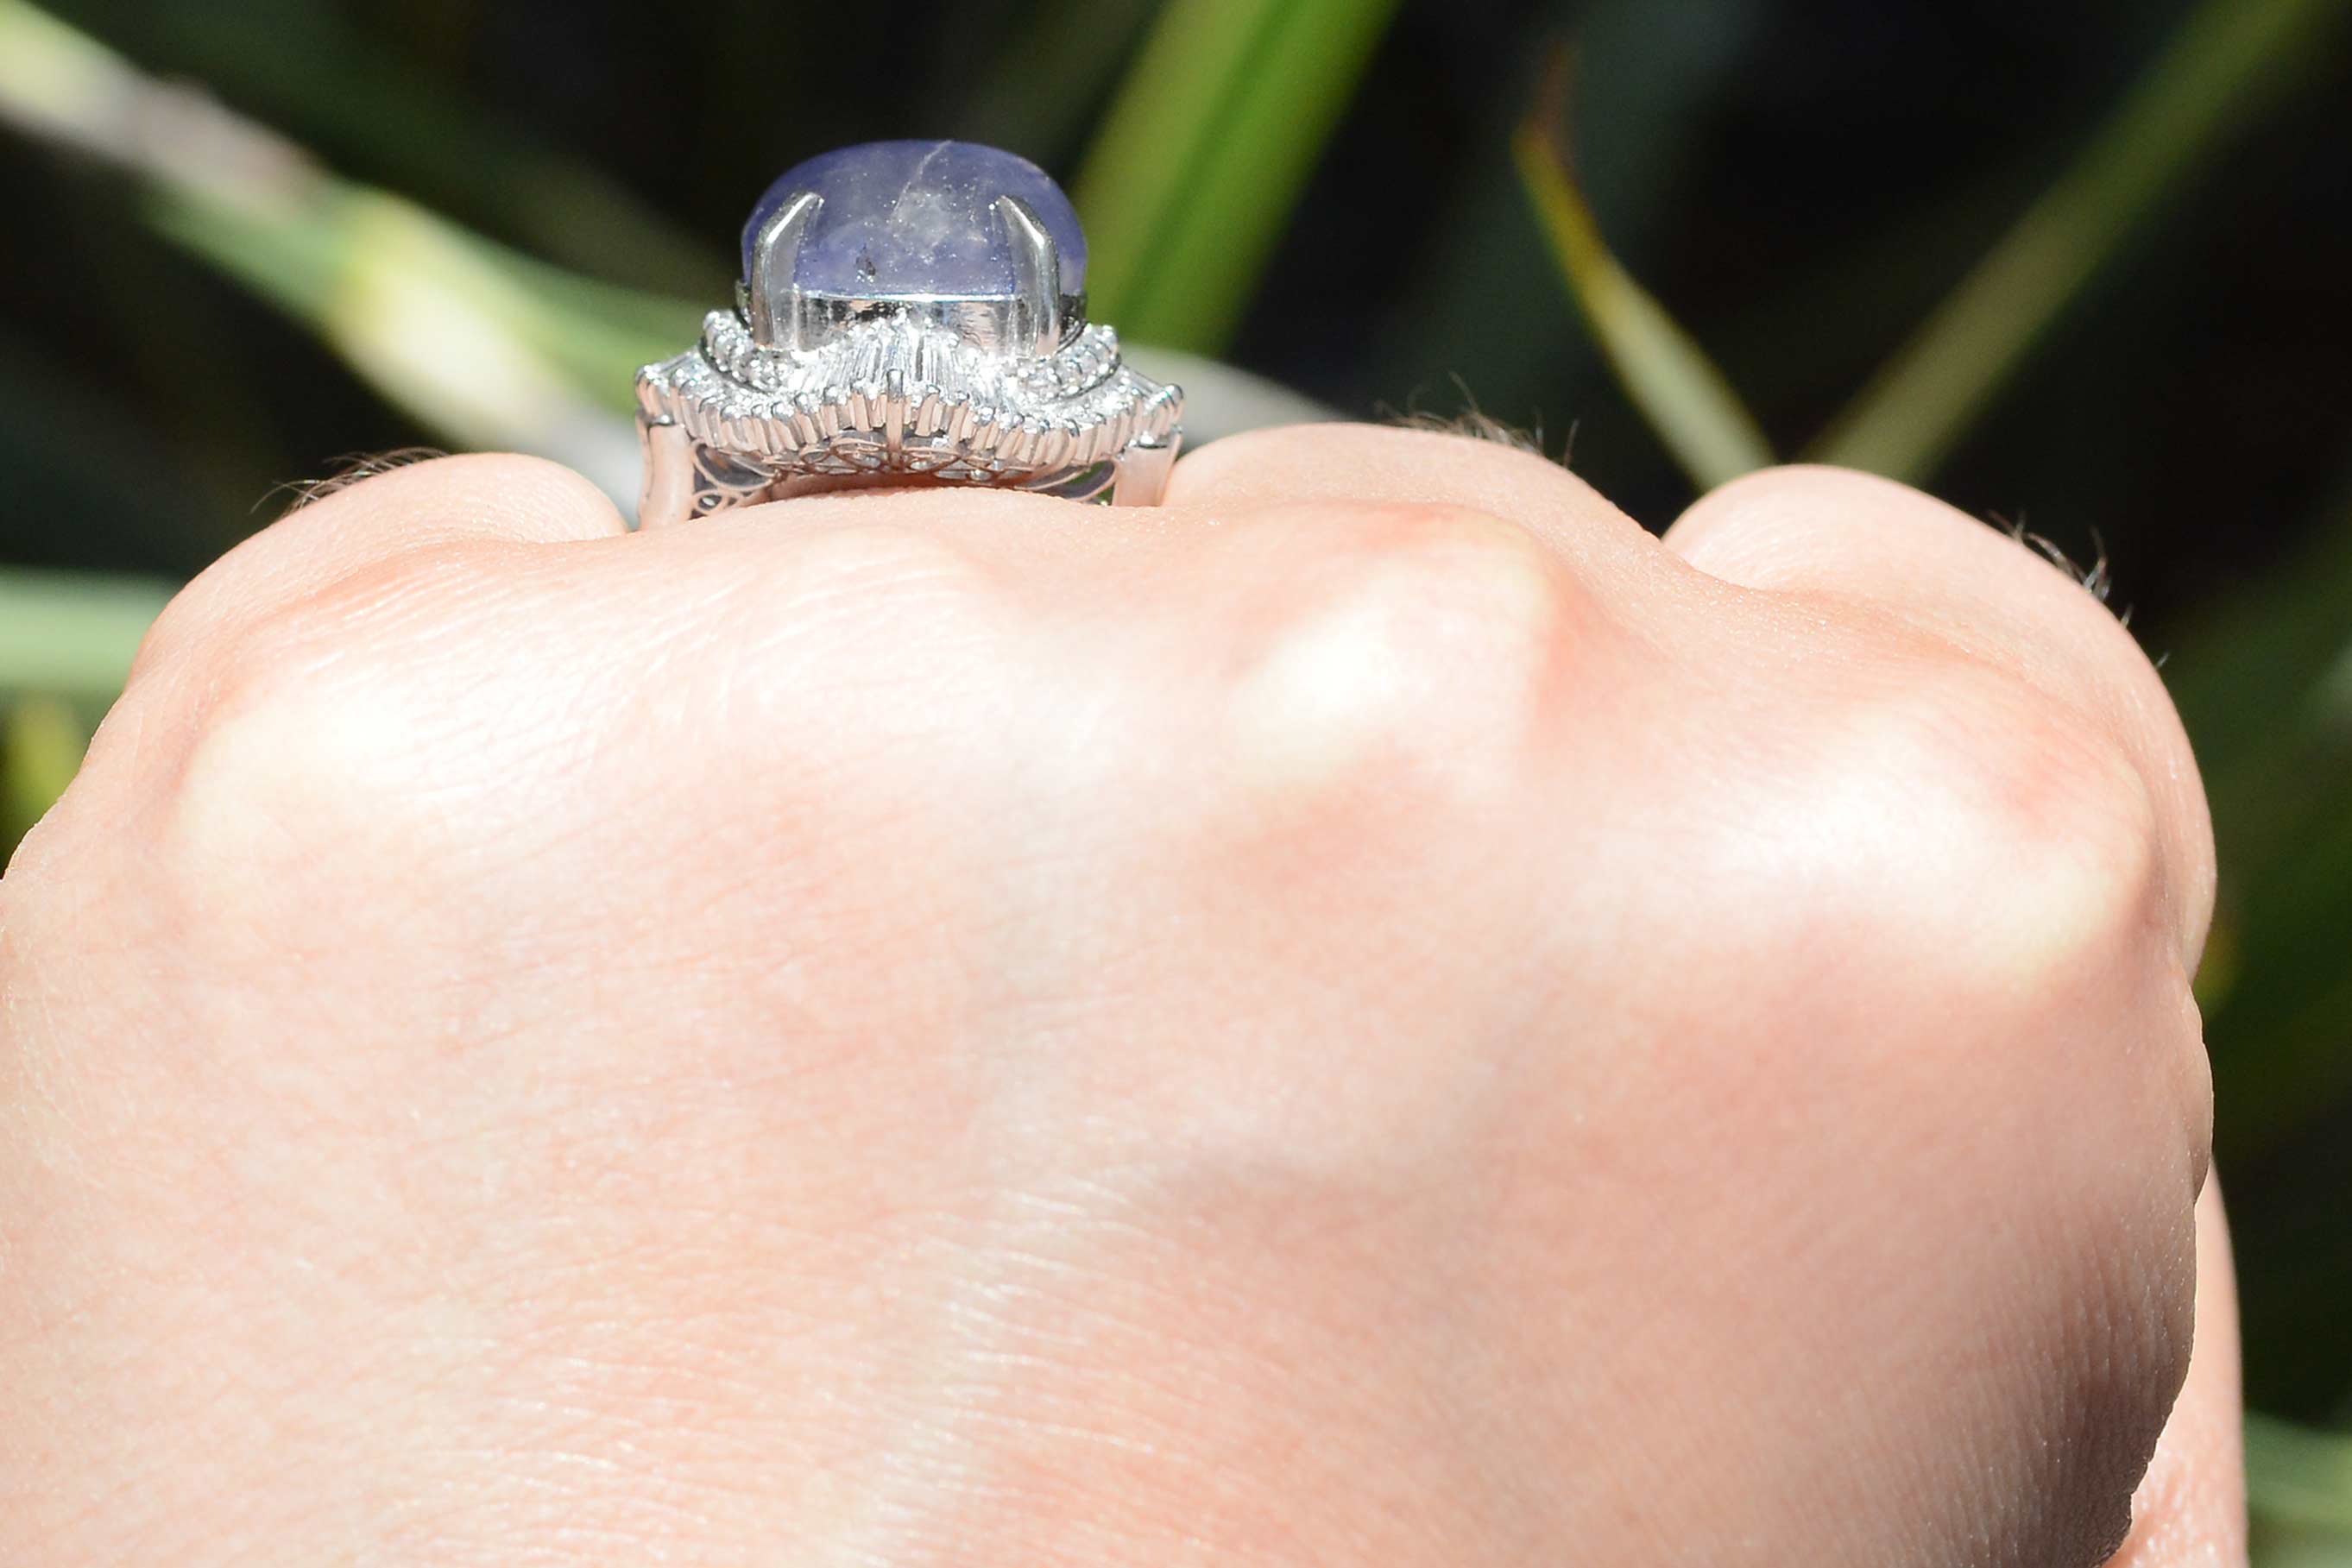 A halo of tapered baguette diamonds line this stunning purple star sapphire dome ring.